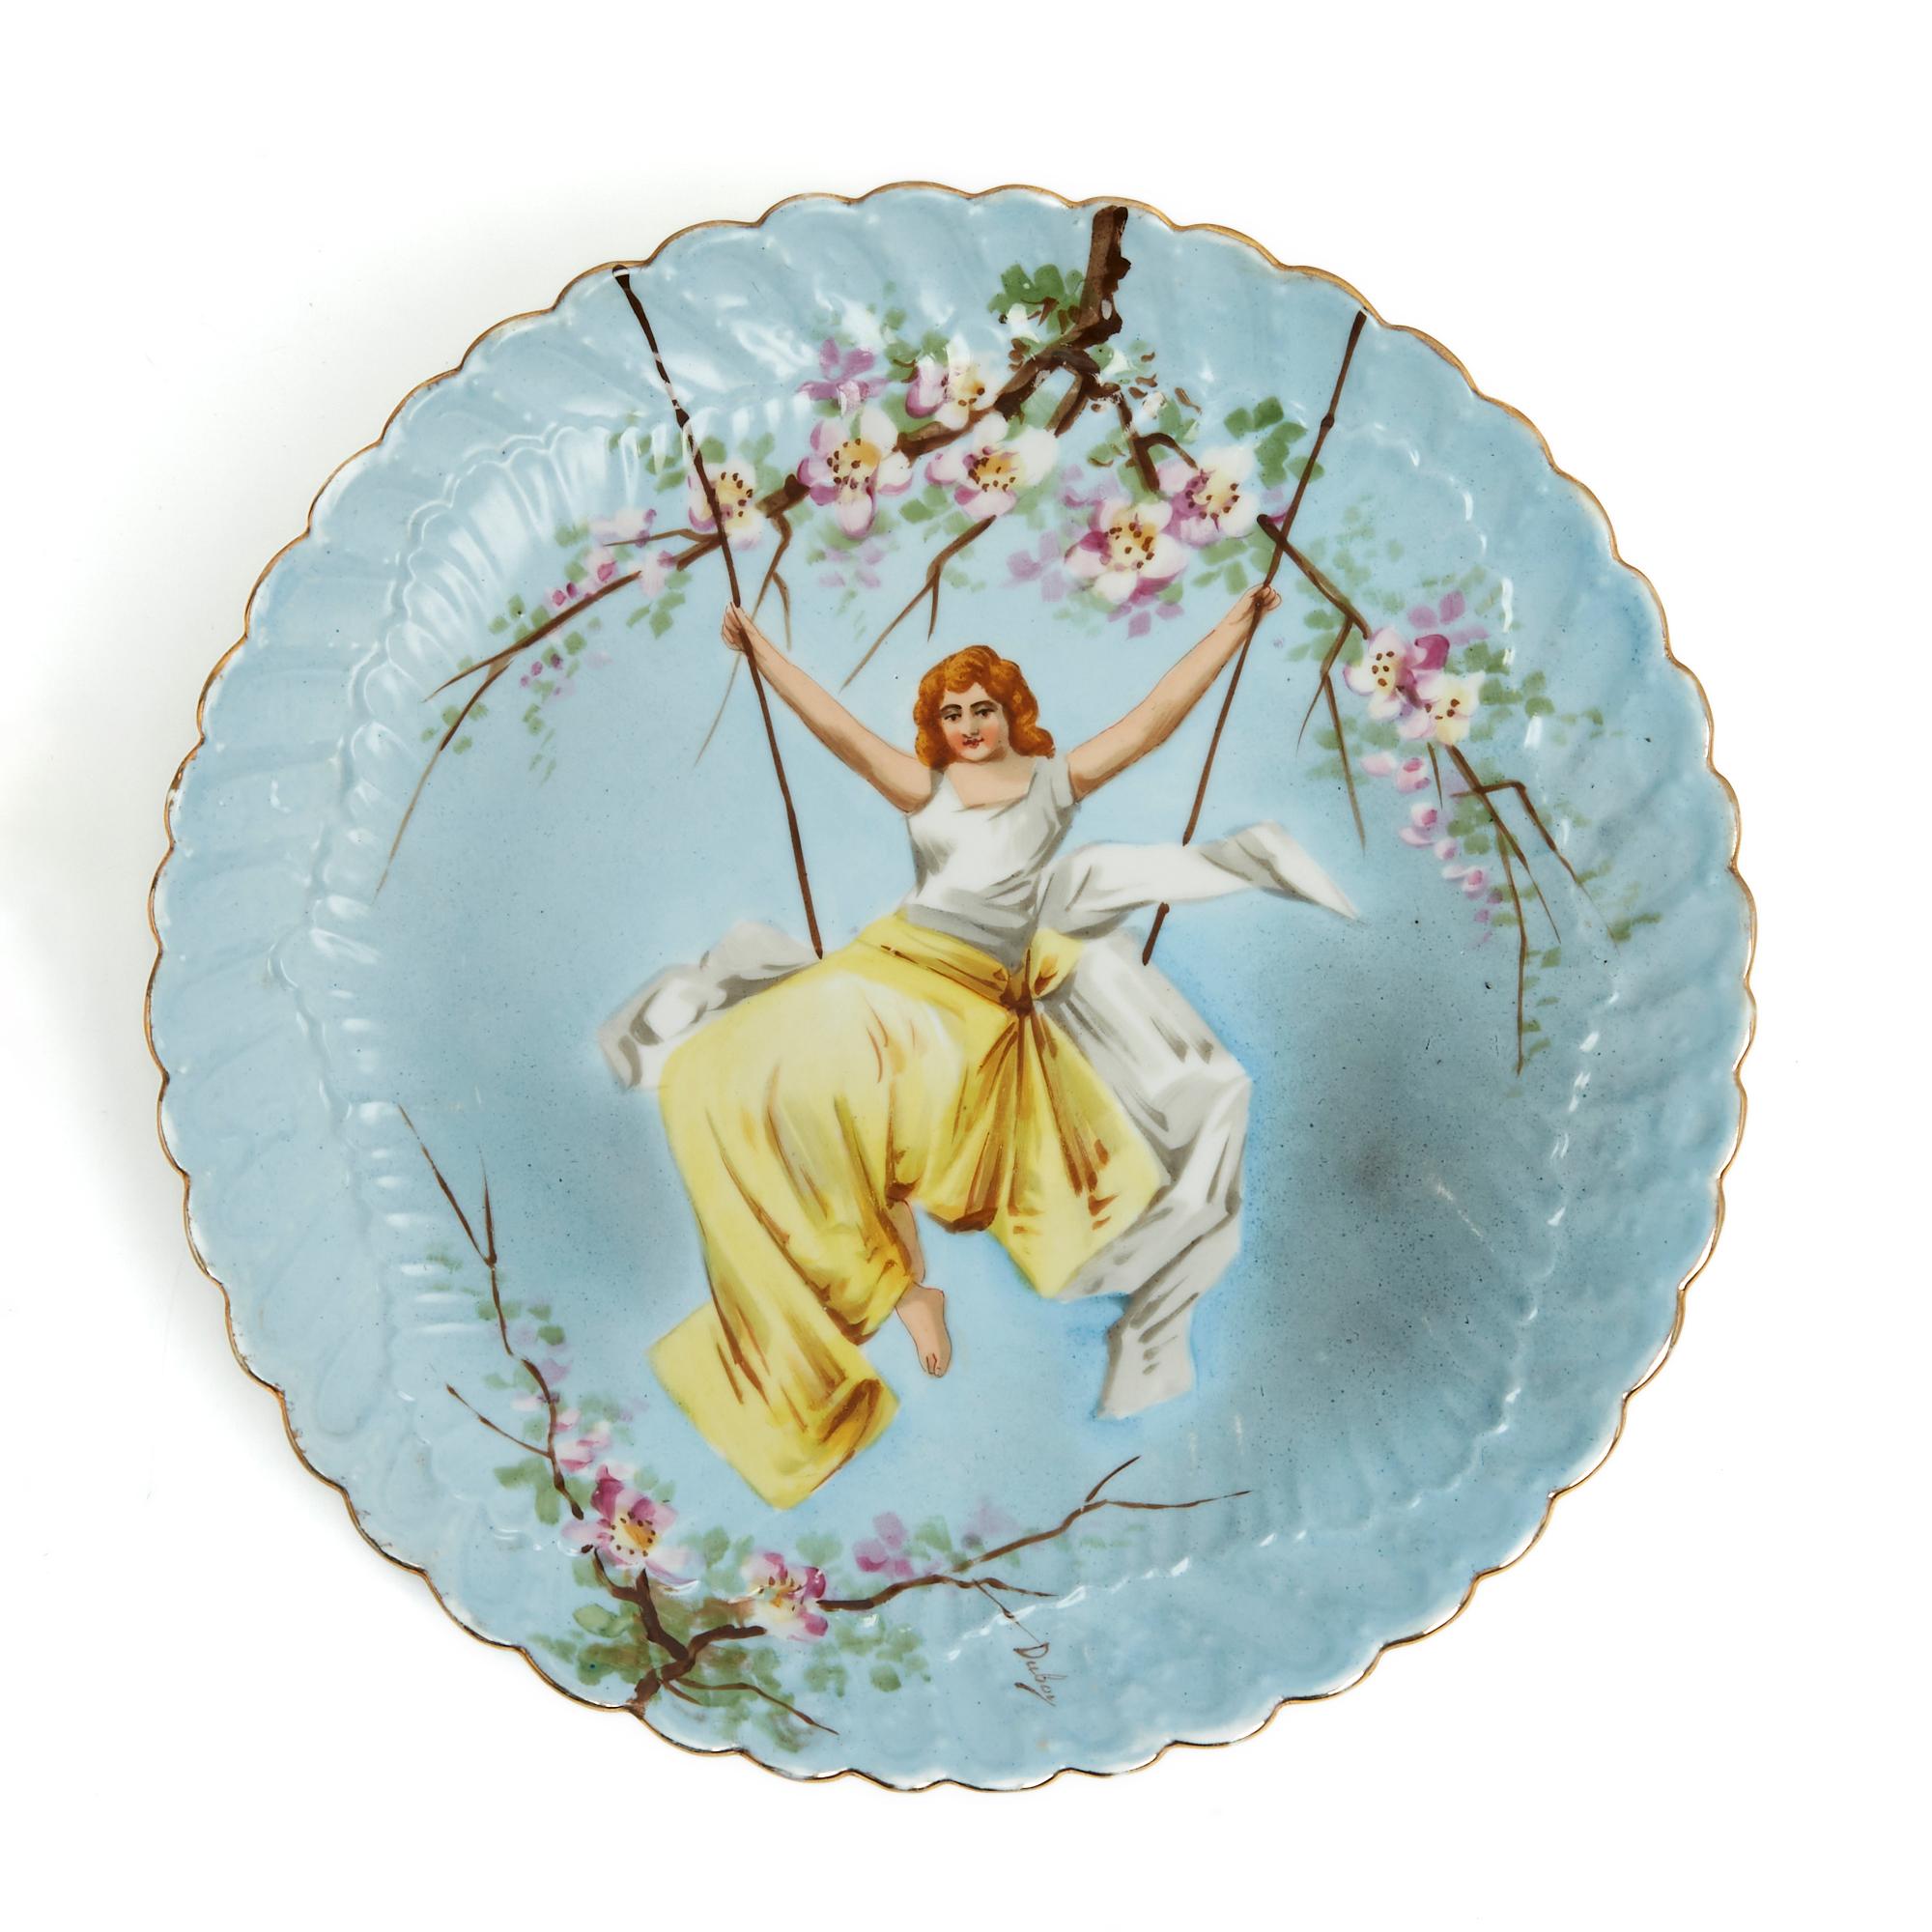 Set composed of 2 dishes illustrated by Paul Duboy (1830-1886) who was a sculptor then ceramist, with the motif of 2 women on a swing surrounded by flowering branches. Diameter 34 cm, height 4.2 cm. The 2 dishes are very vintage and the pattern